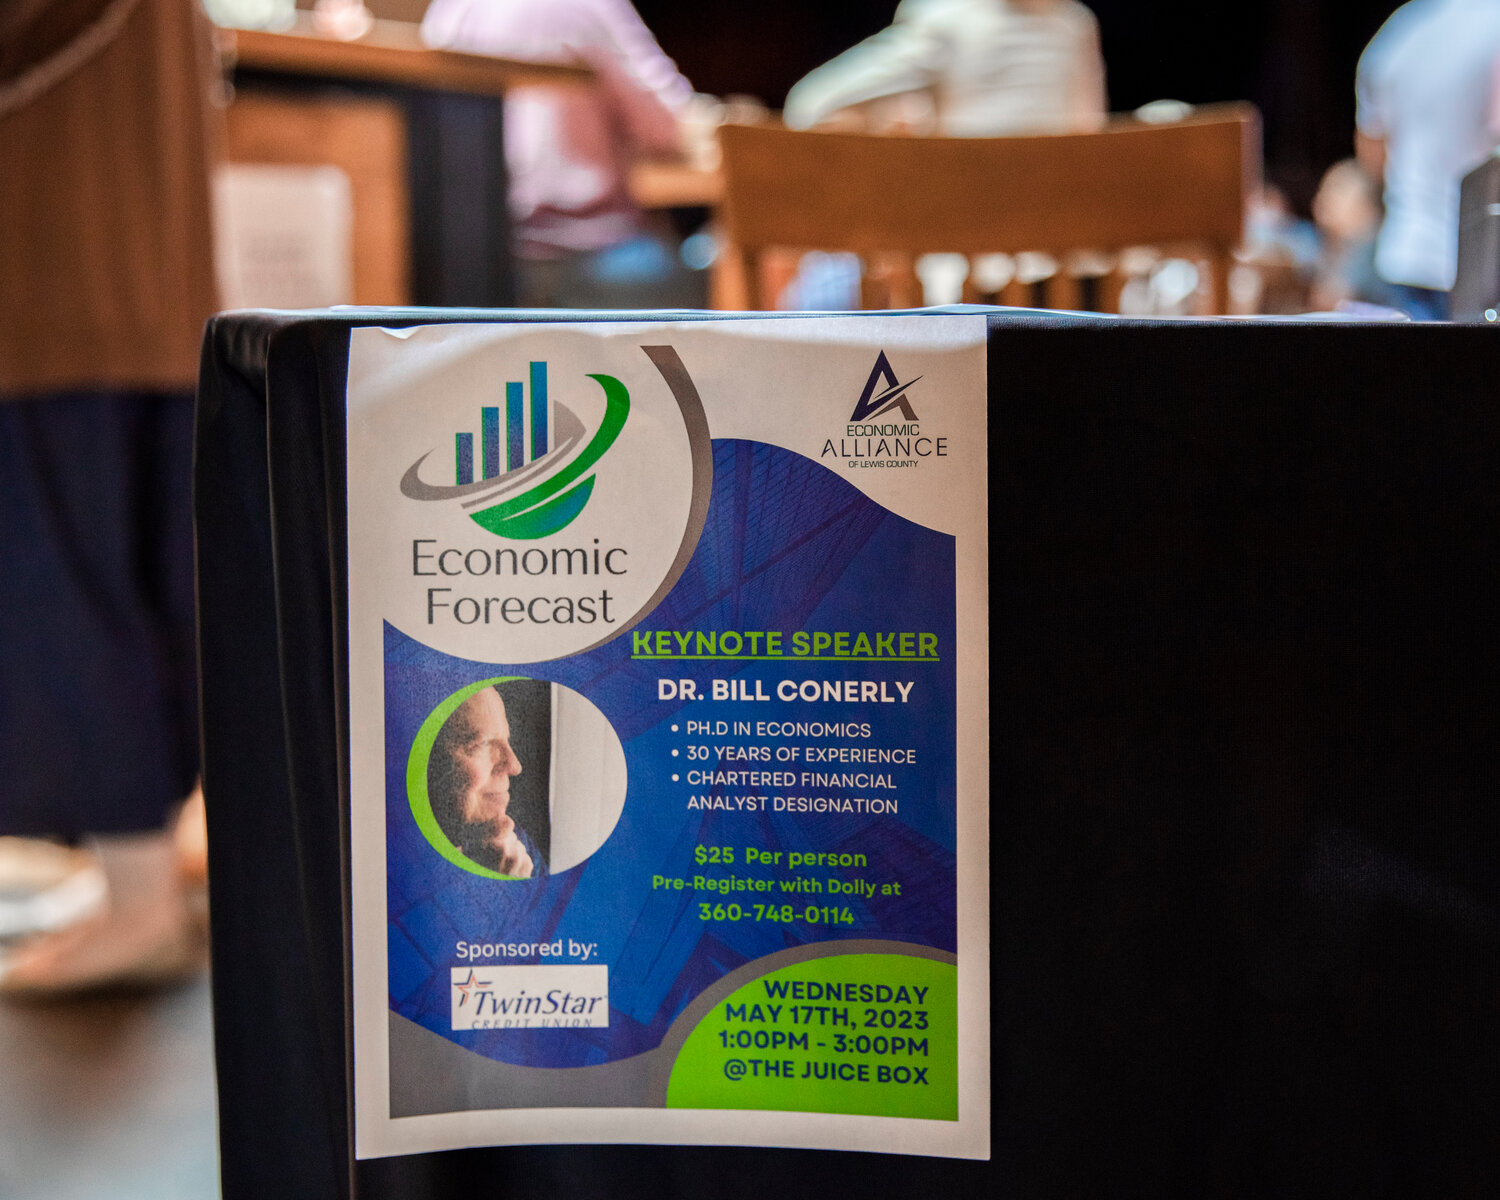 Dr. Bill Conerly gives an economic forecast for Lewis County during an event hosted by the Economic Alliance of Lewis County at The Juice Box in Centralia on Wednesday, May 17.